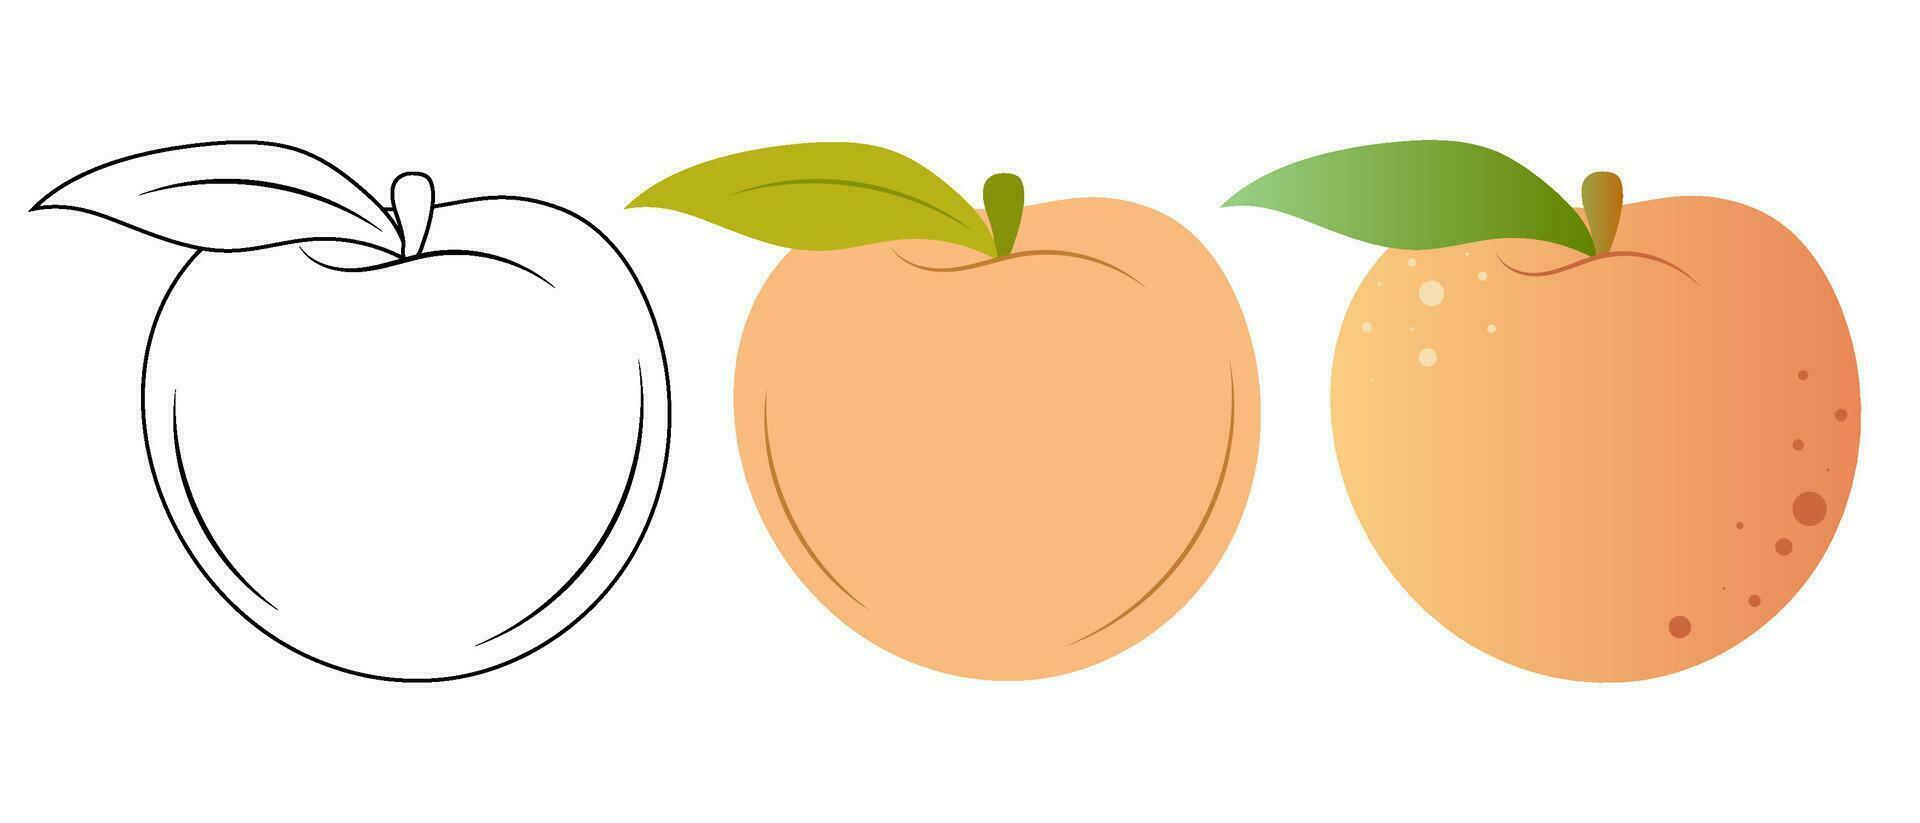 Set of vector illustrations of peach in flat, doodle and 3D styles on a white background.